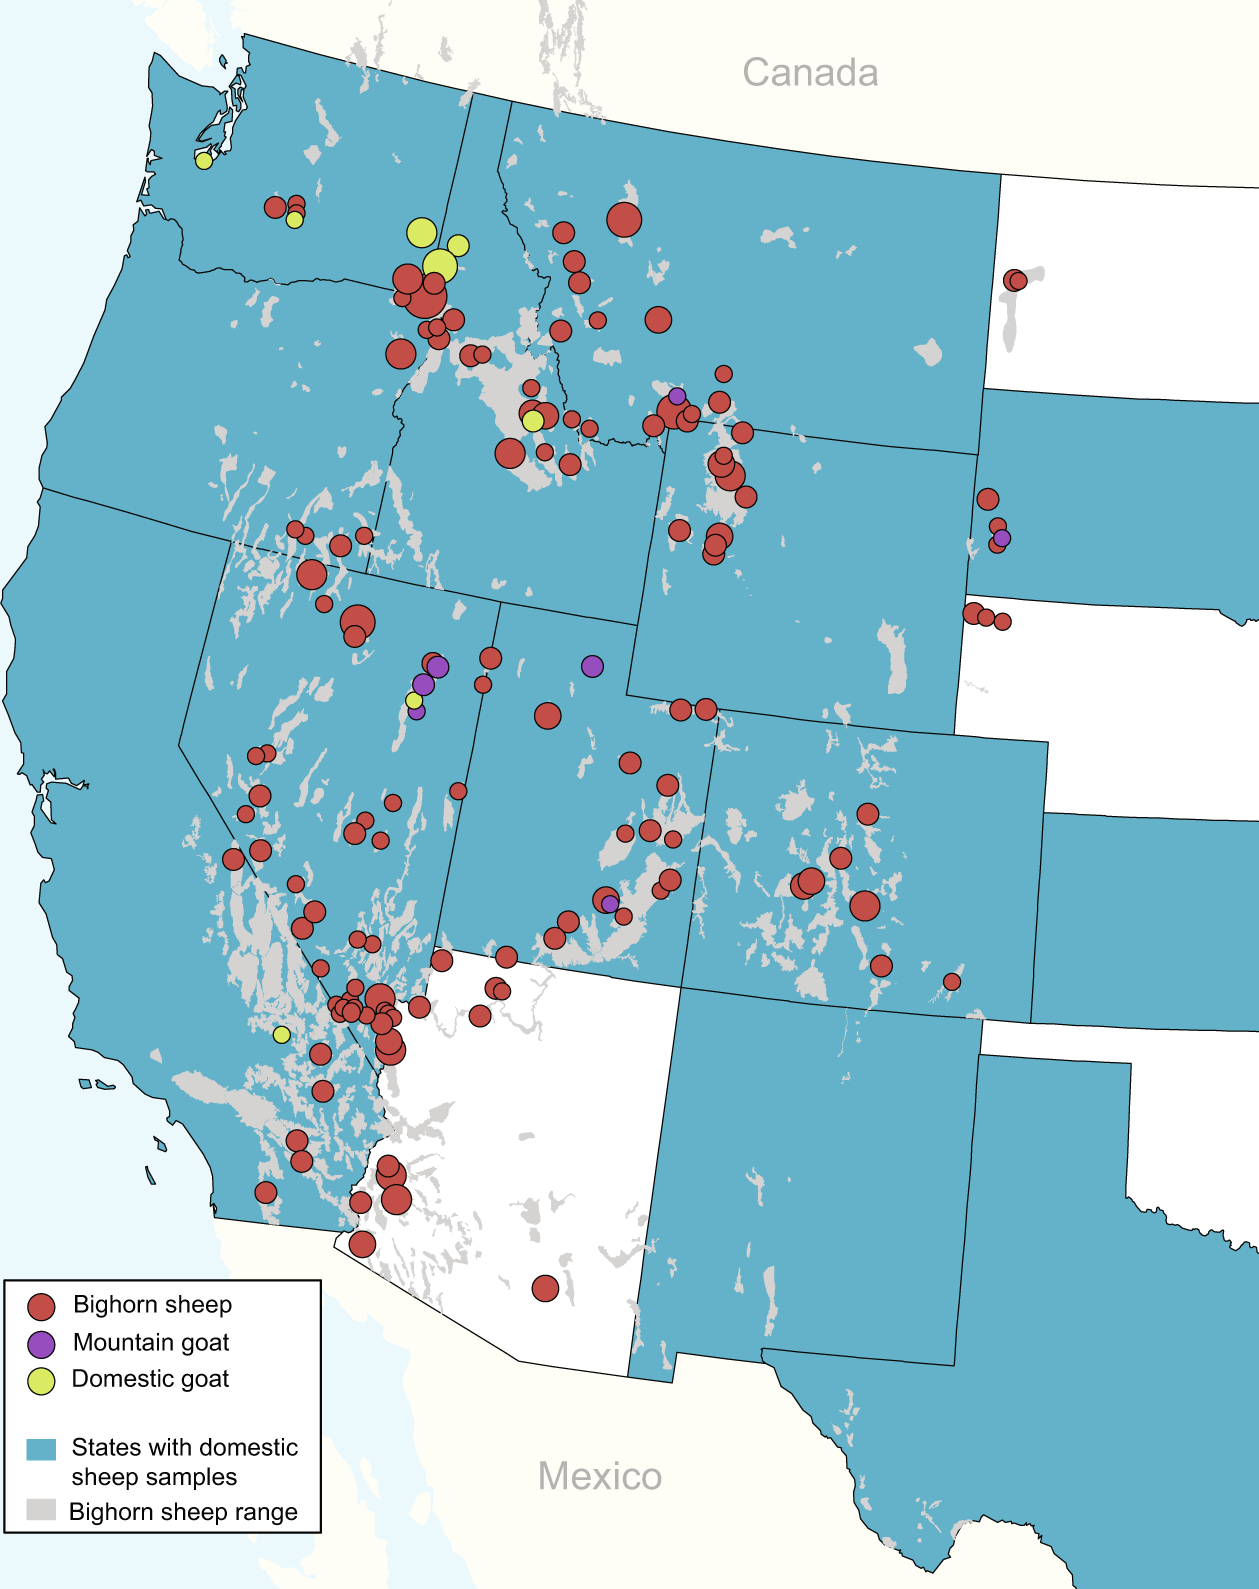 Genetic structure of Mycoplasma ovipneumoniae informs pathogen spillover  dynamics between domestic and wild Caprinae in the western United States |  Scientific Reports